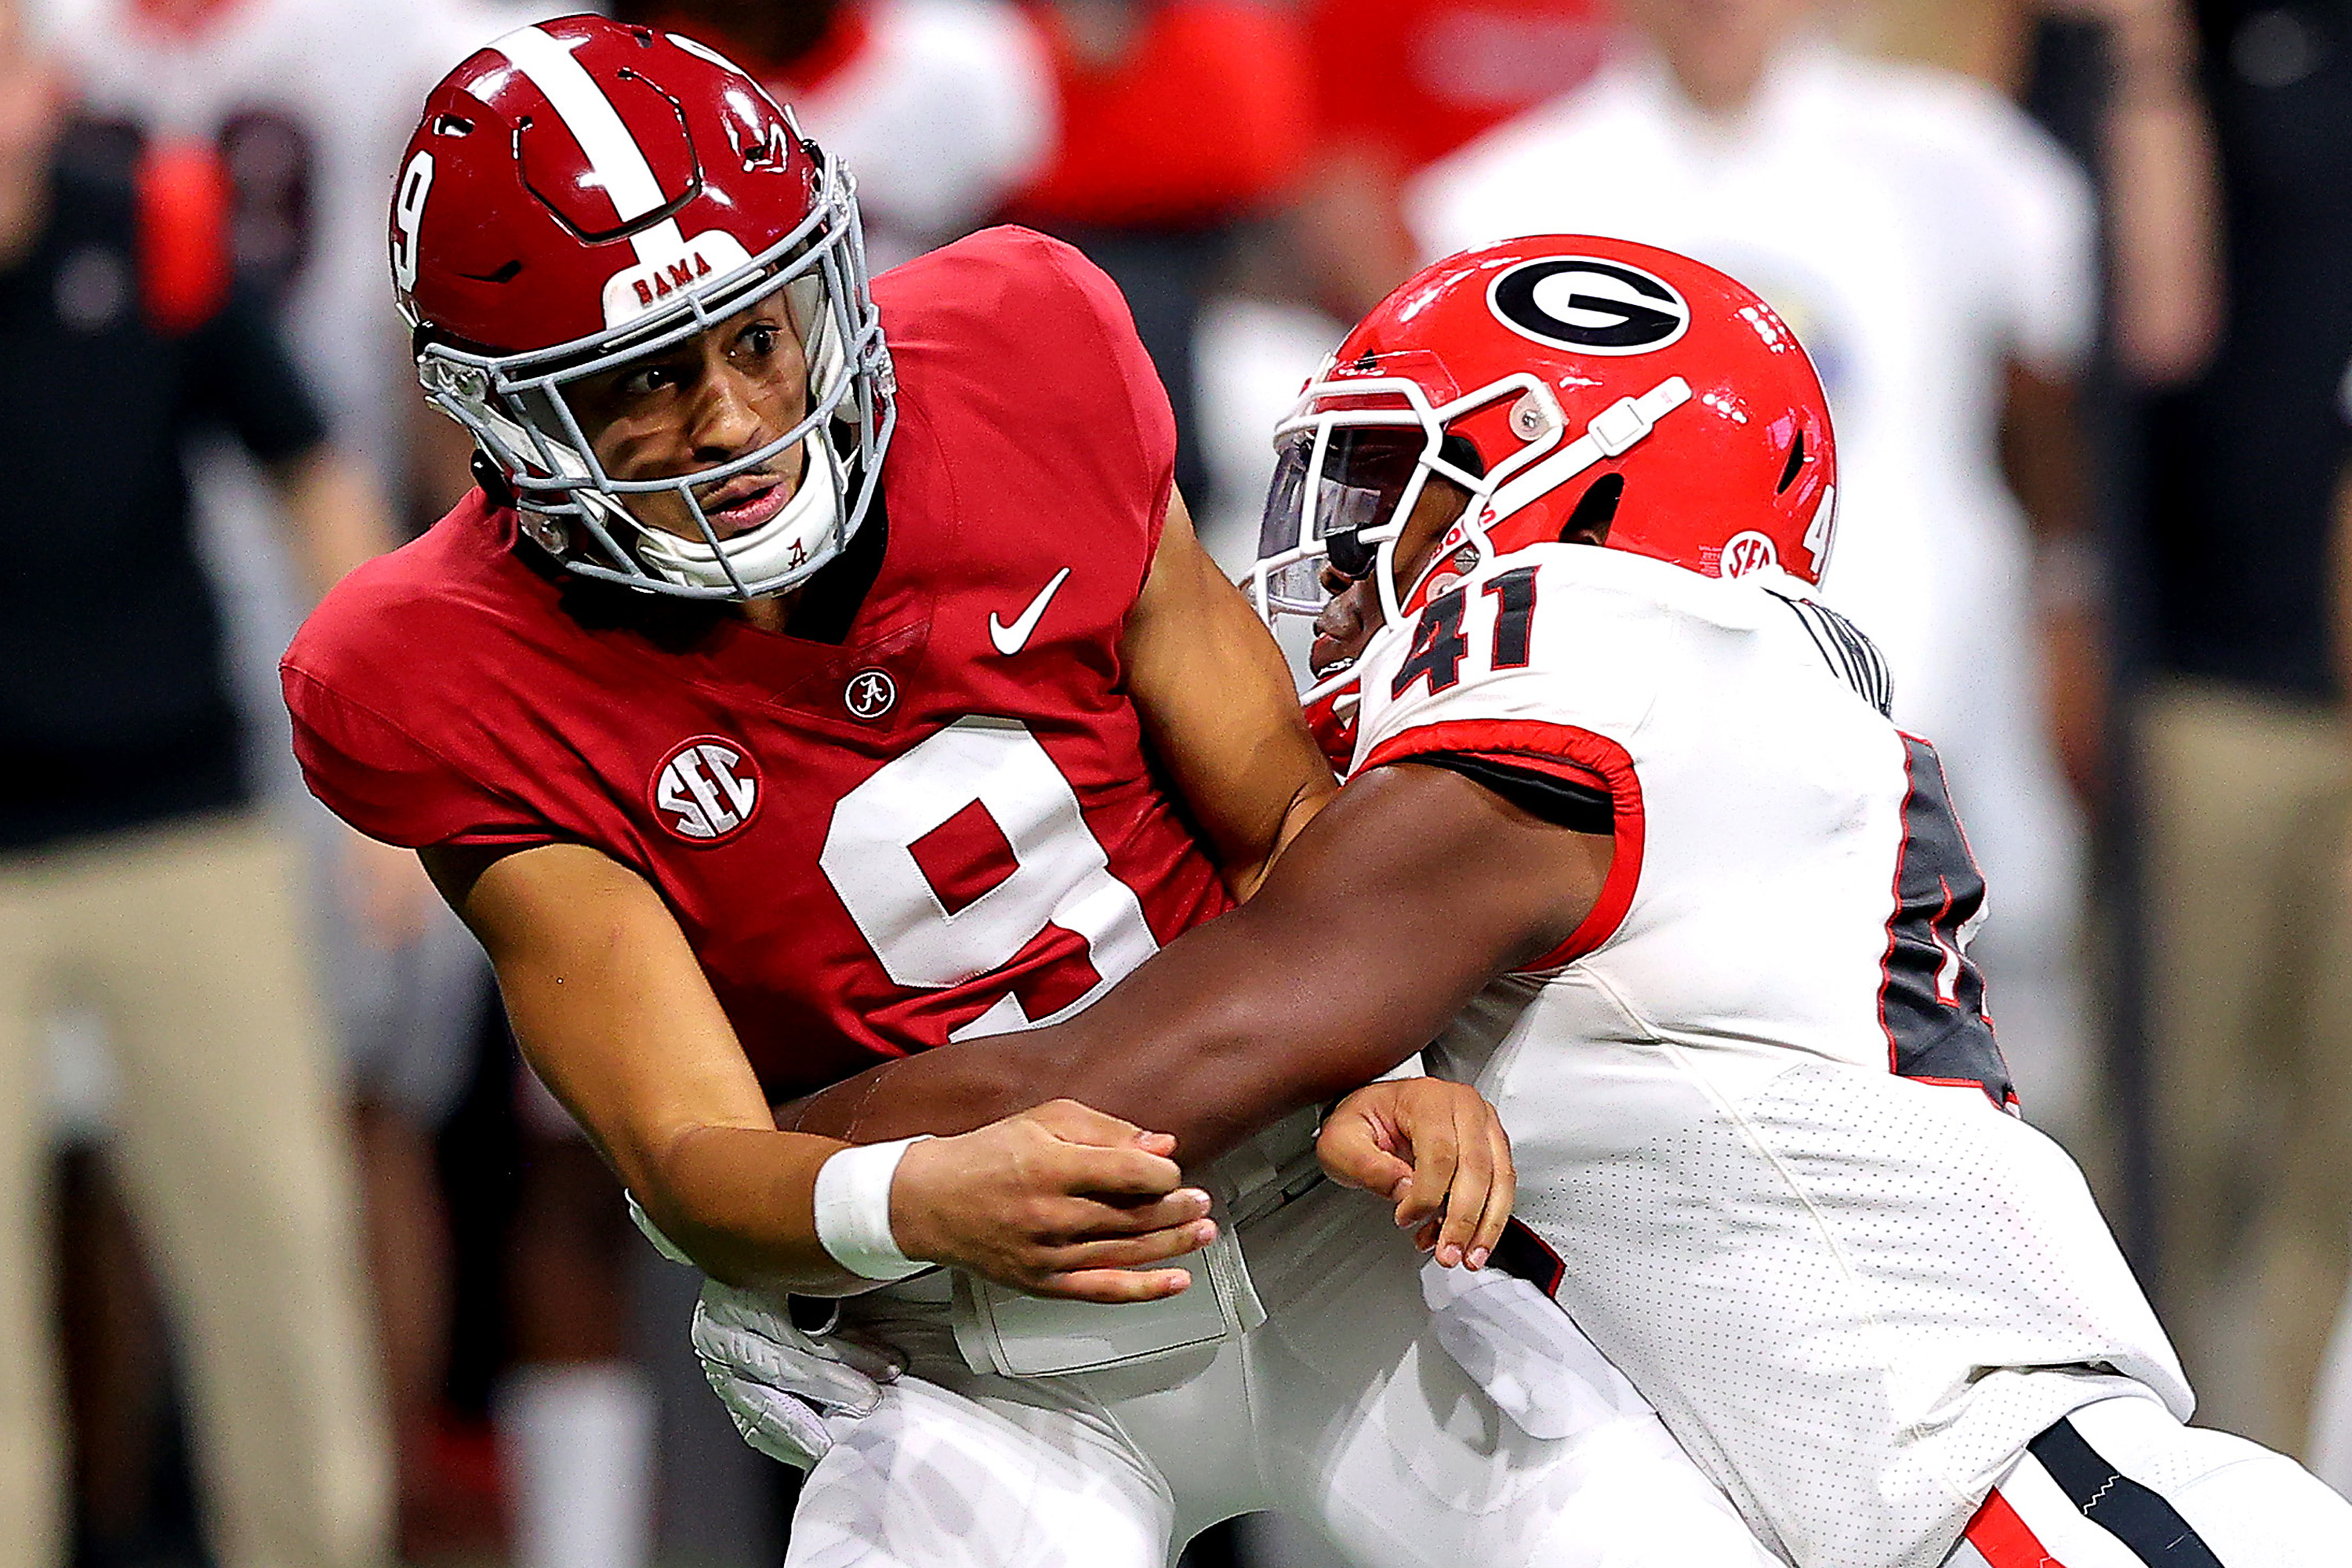 Georgia vs Alabama Point Spread, Over/Under, Moneyline and Betting Trends for CFP National Championship Game